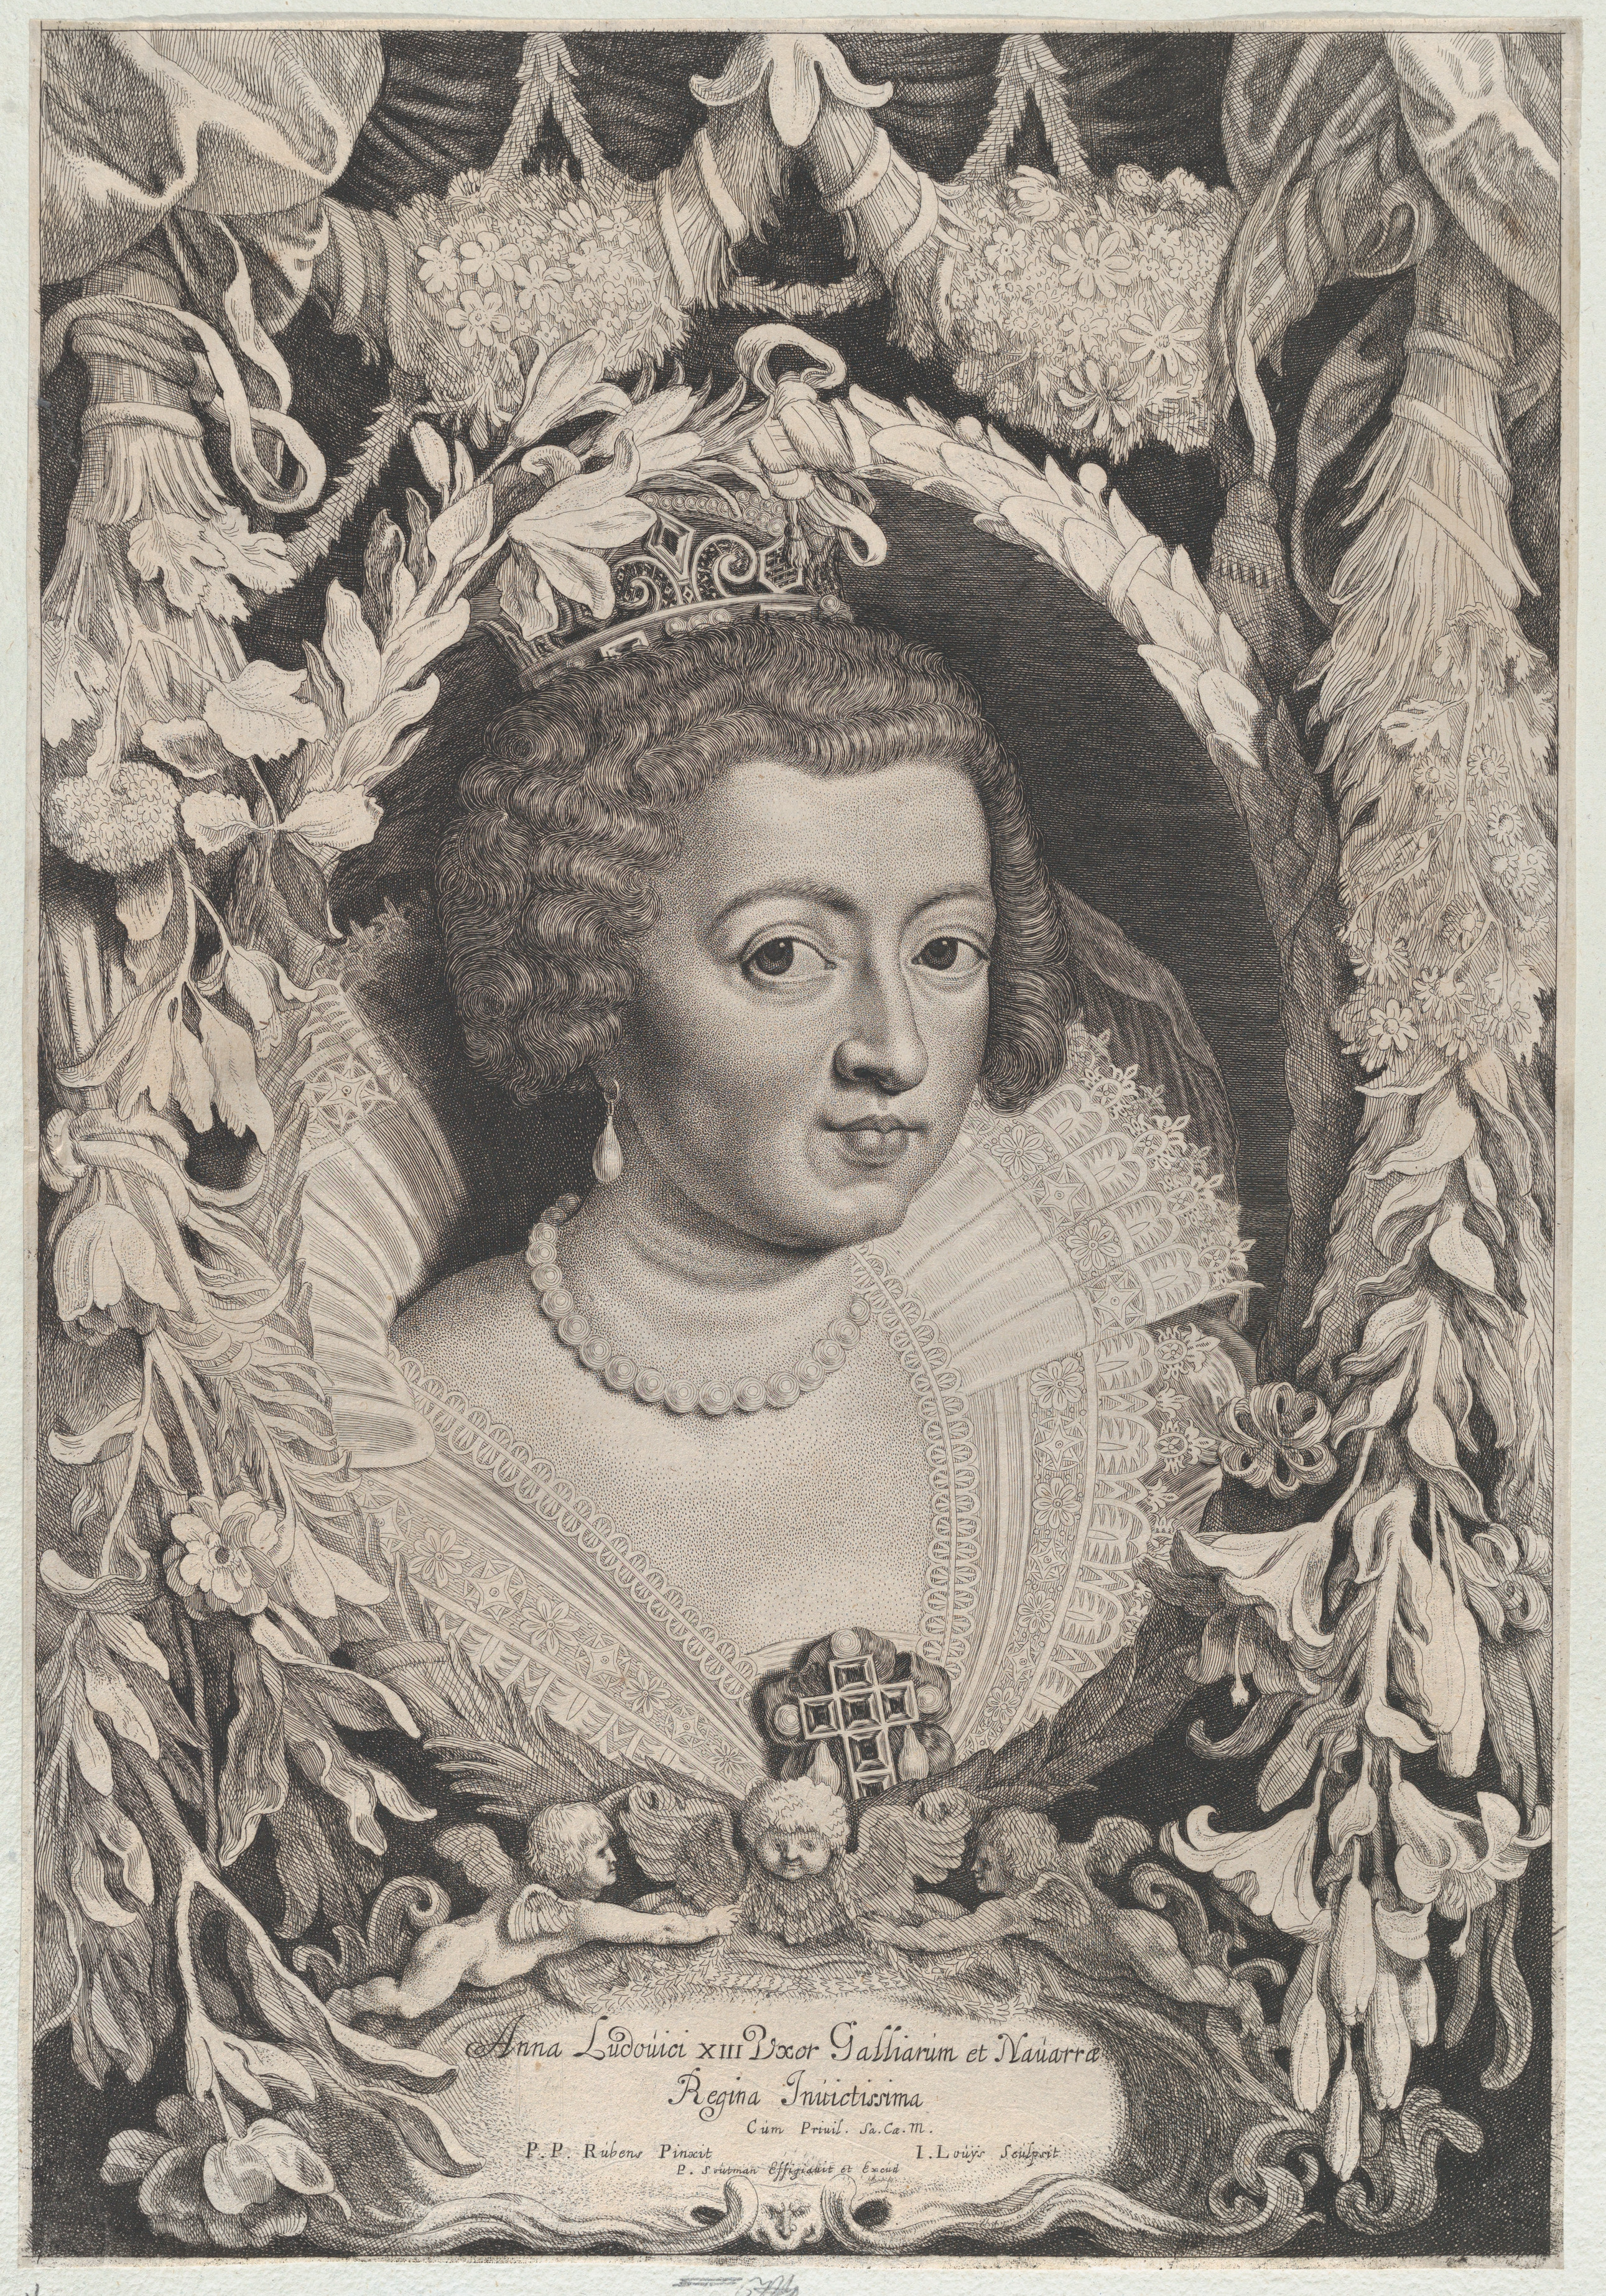 Image of Anne d'Autriche 1601-1666, queen of France from 1615 to 1643